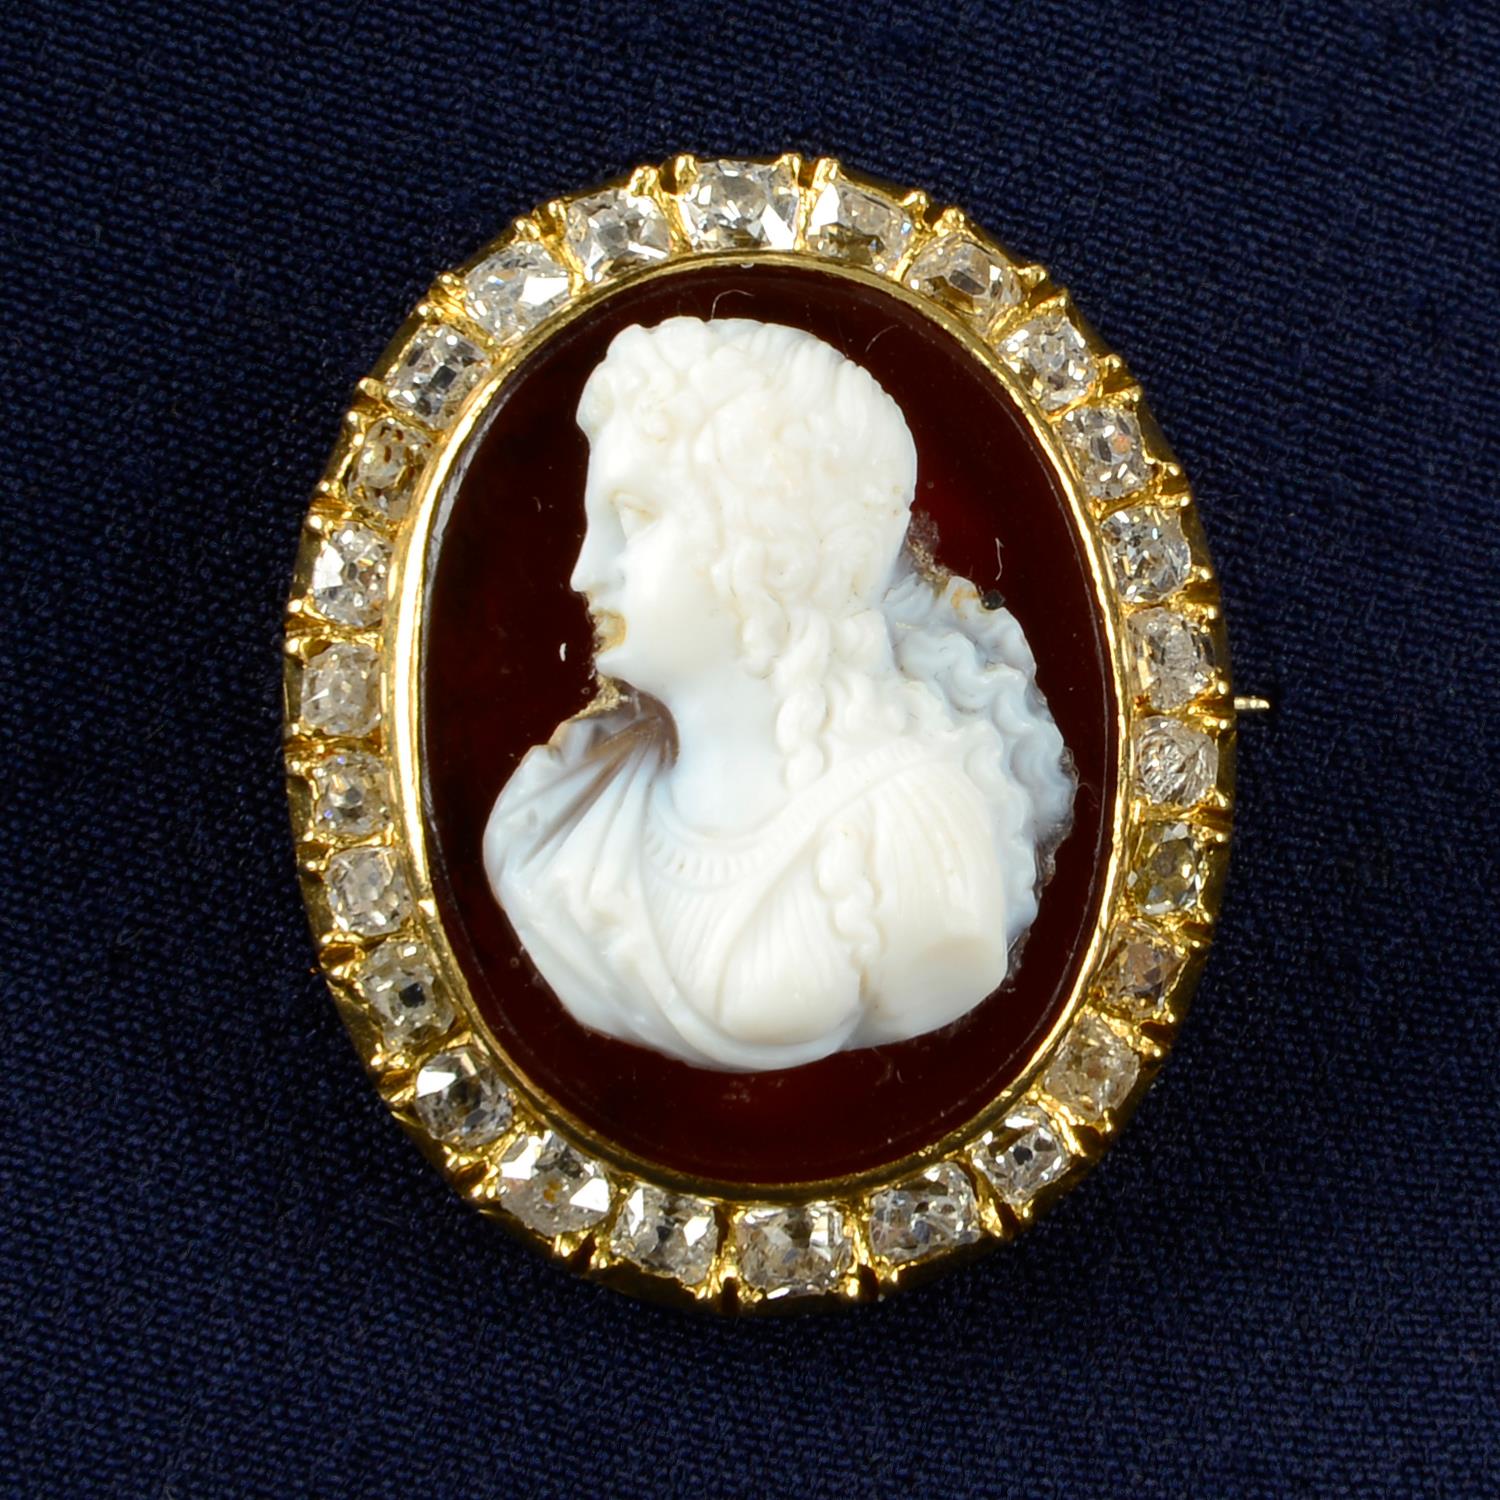 A late 19th century 18ct gold agate cameo and old-cut diamond brooch, depicting a lady in profile.